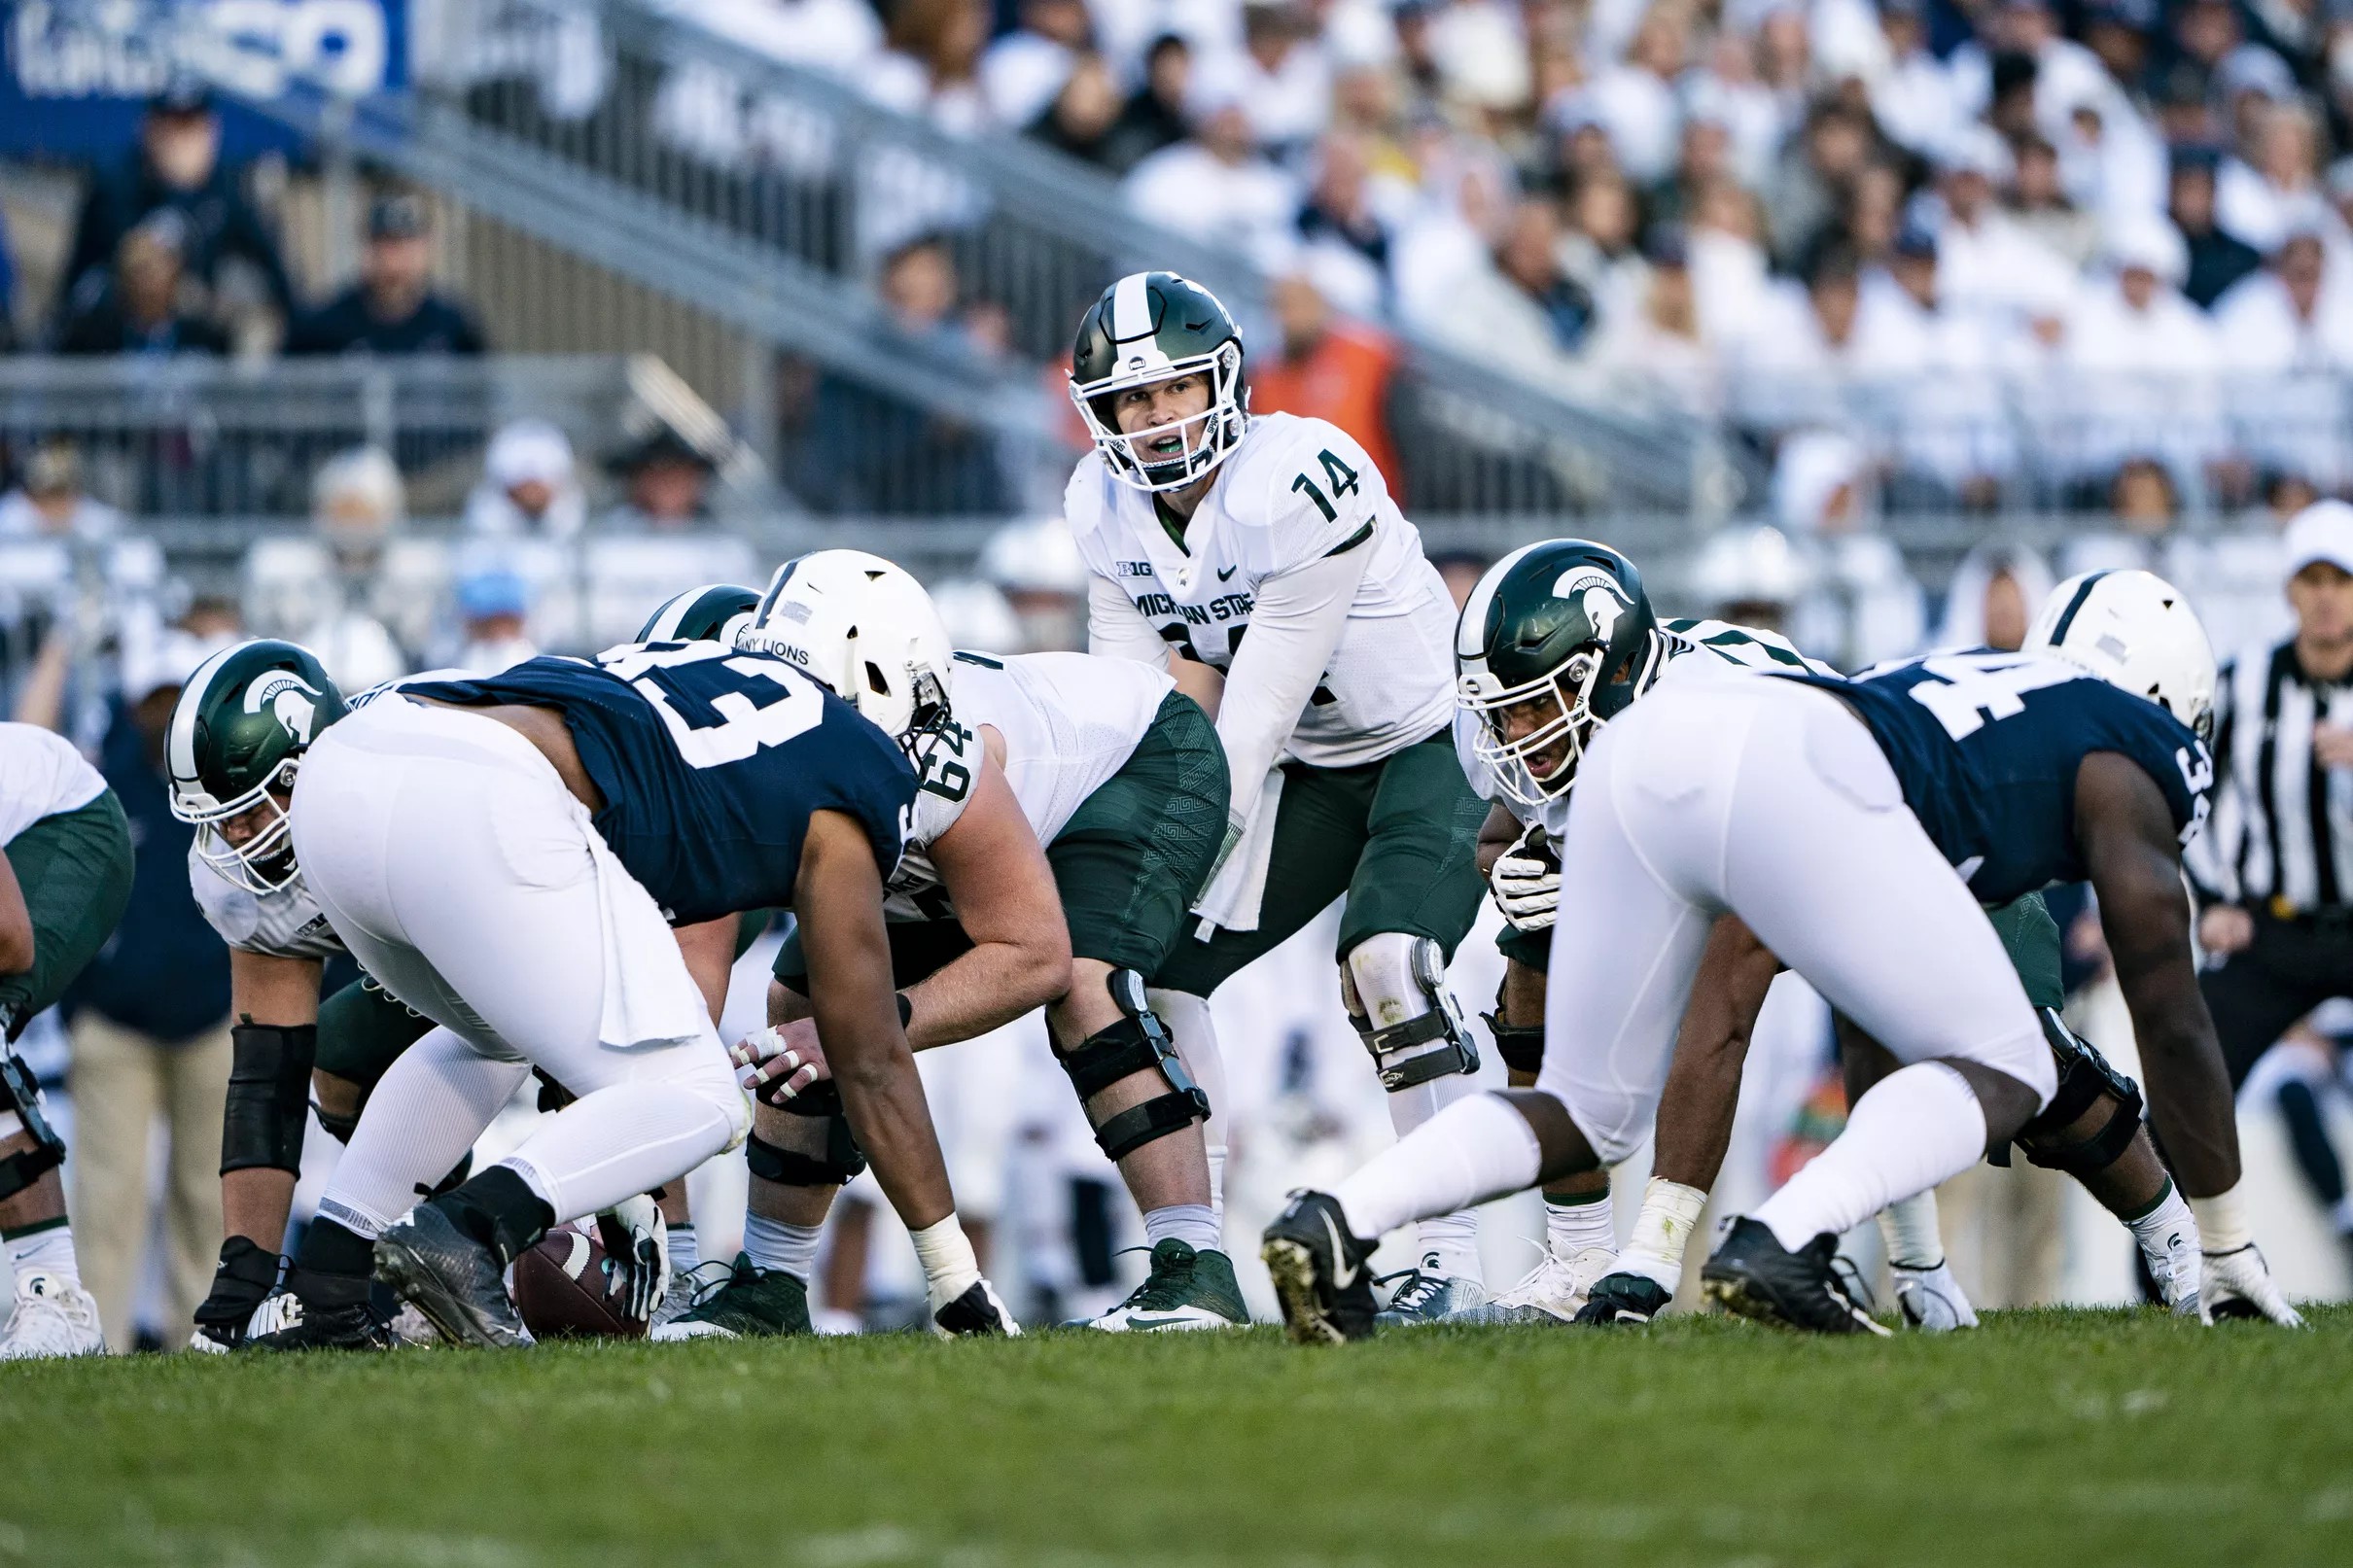 Game Preview Penn State Nittany Lions vs. Michigan State Spartans